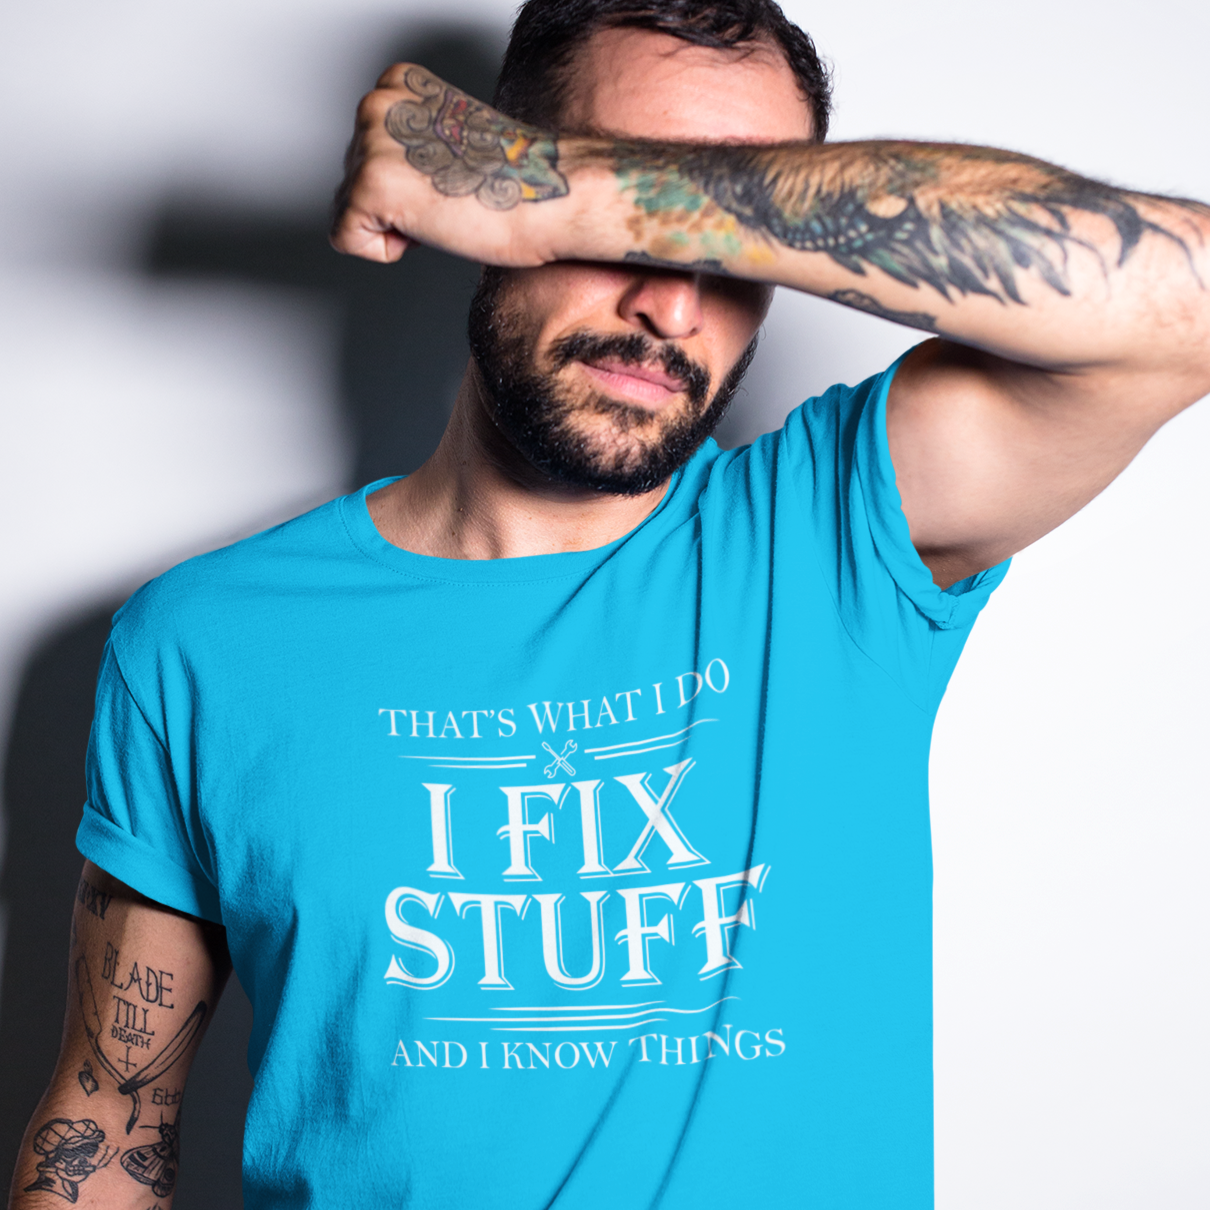 tattooed-man-covering-his-face-while-wearing-a-t-shirt that says I fix stuff and know things